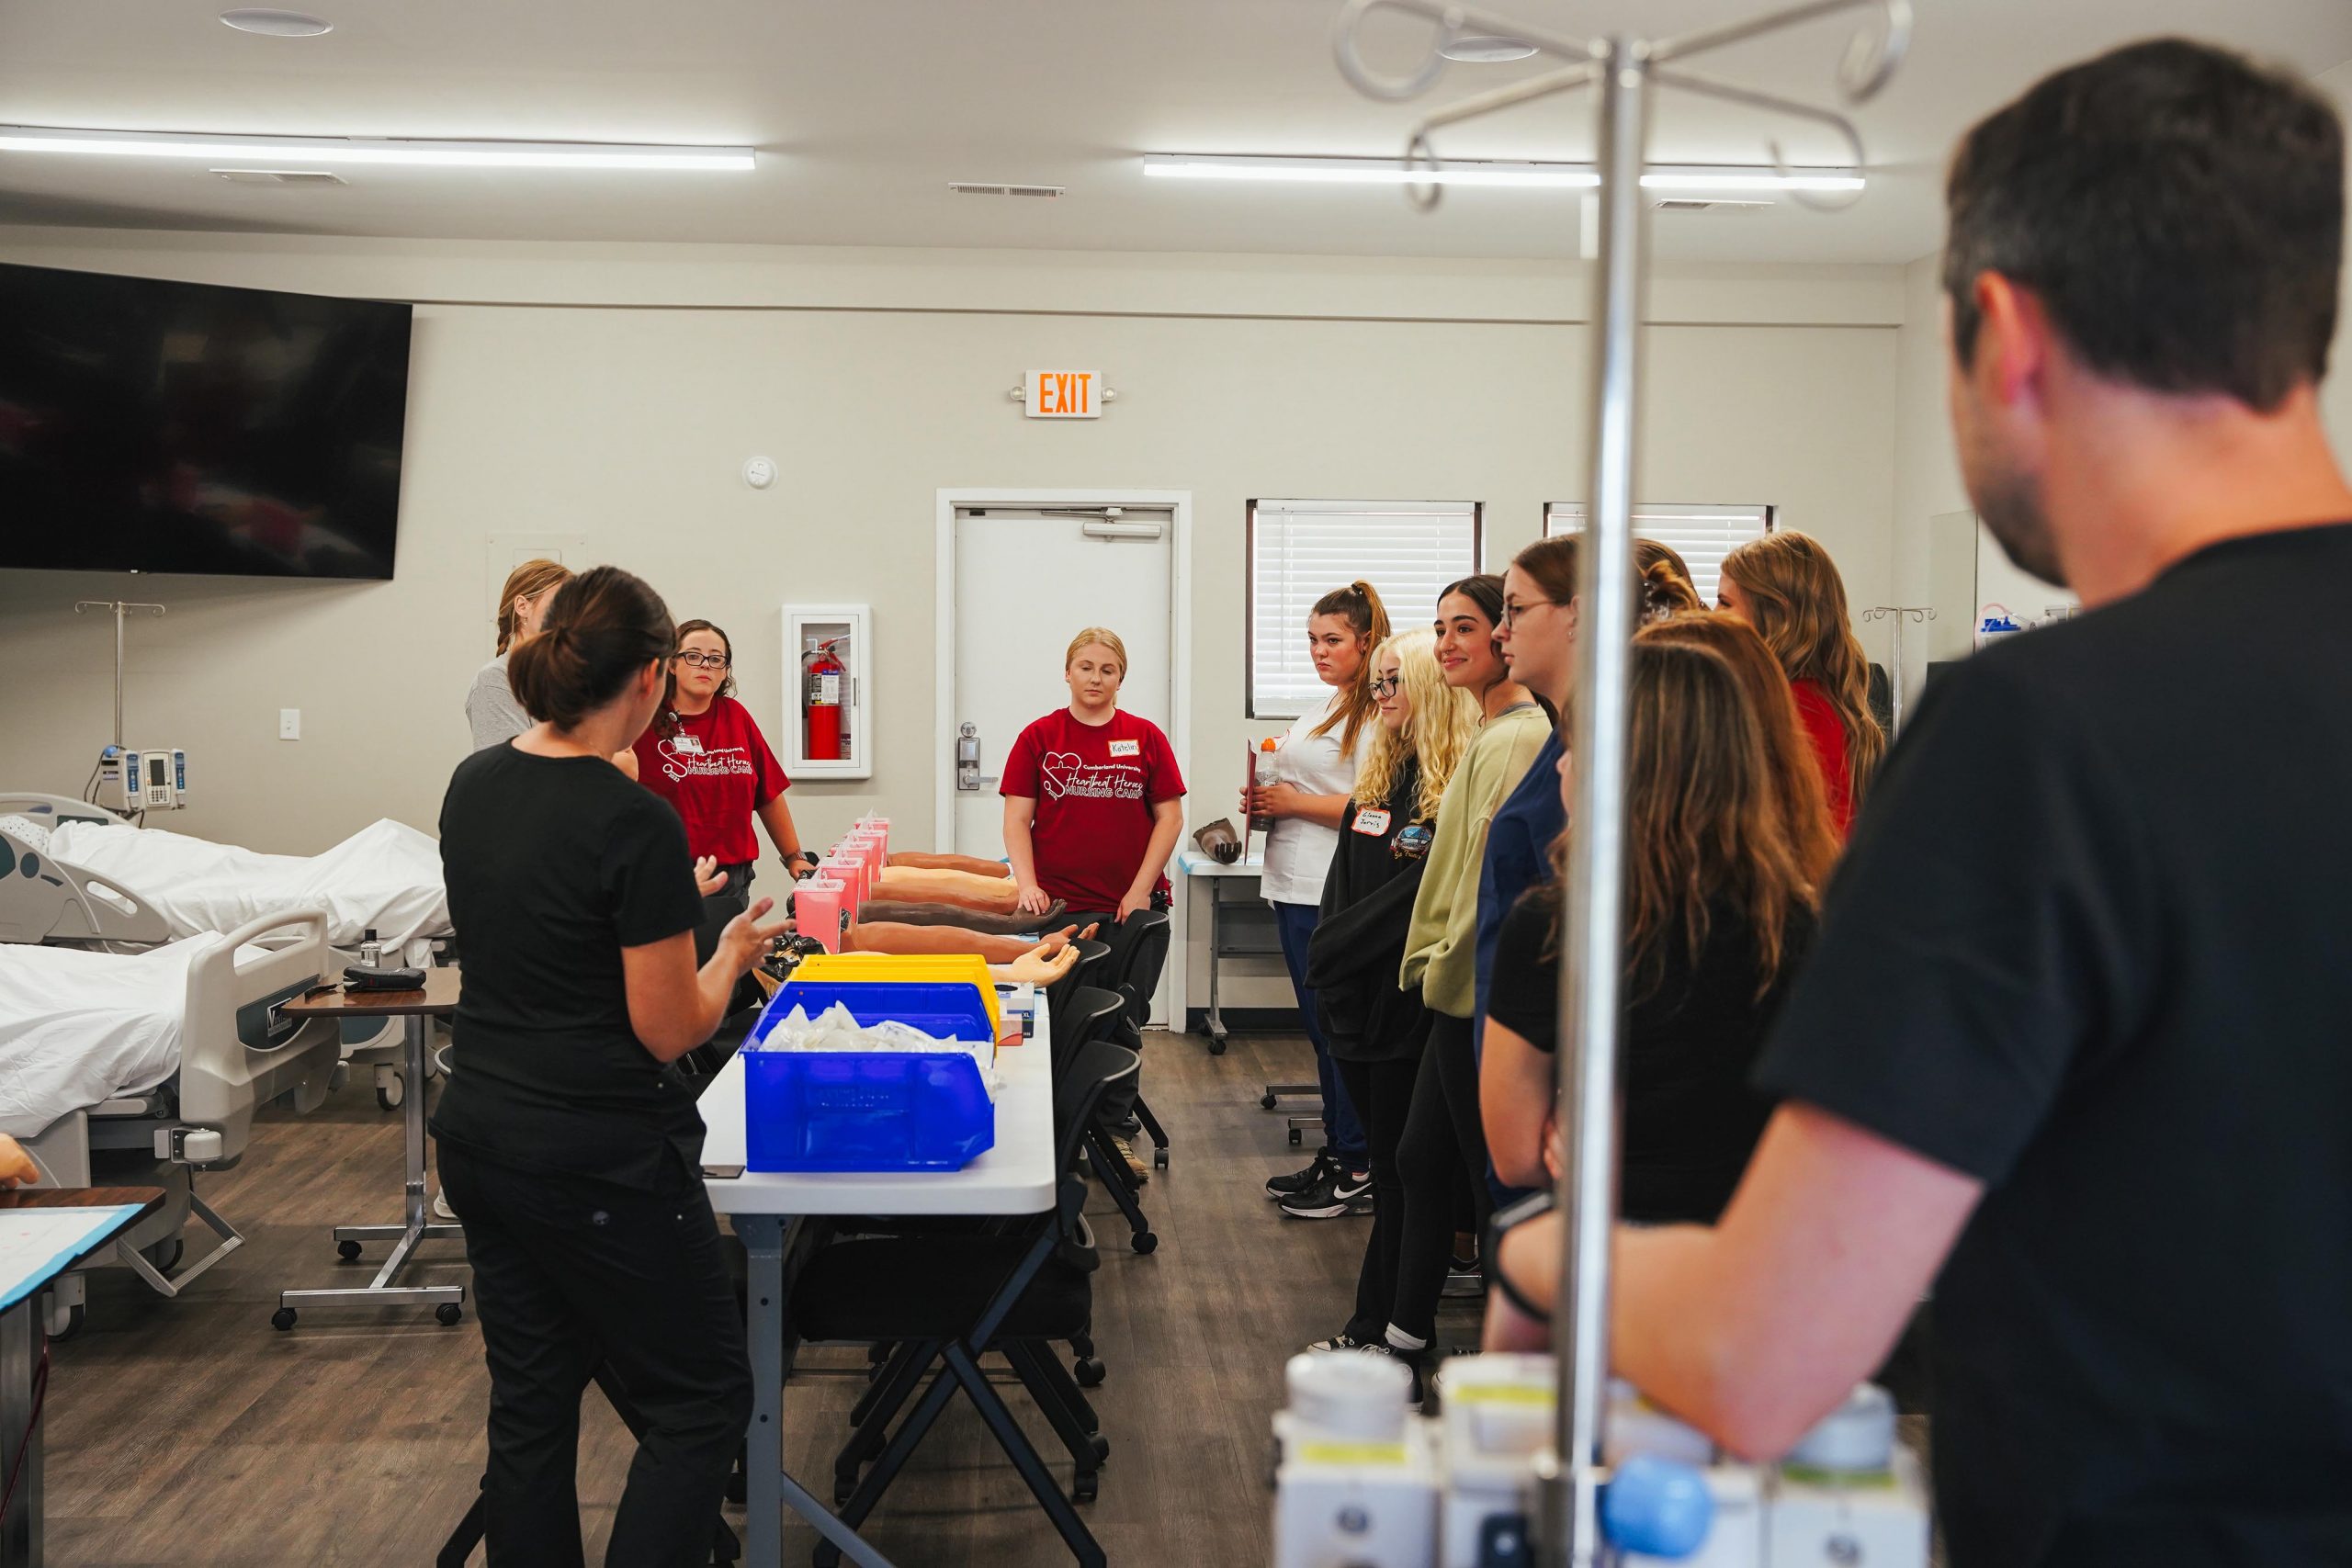 Cumberland faculty introduce students to the IV station during Heartbeat Heroes Nursing Camp